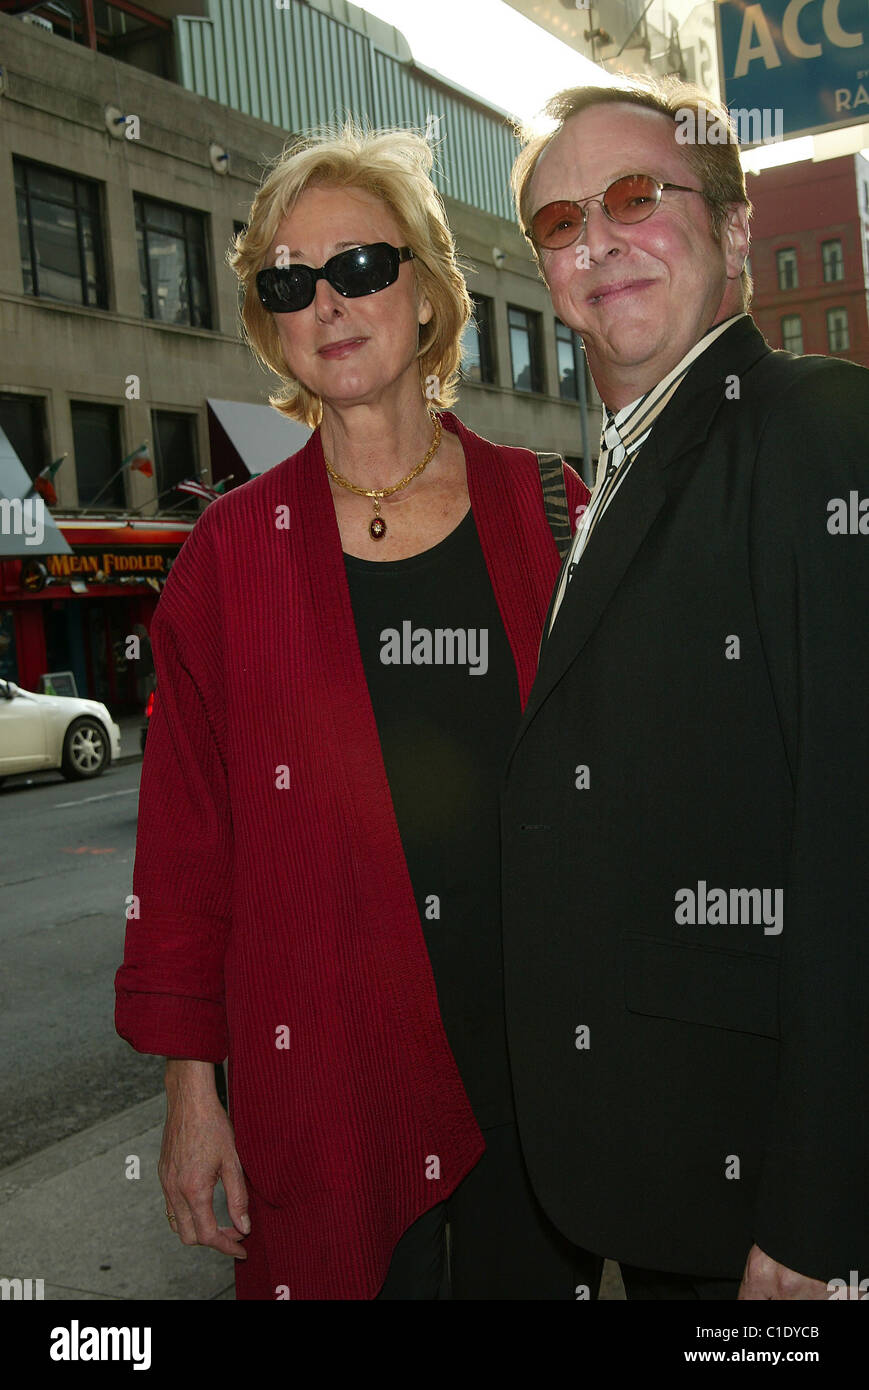 Maria Aitken and Edward Hibbert  Opening Night of the Broadway play "Accent On Youth" at the Friedman Theatre - Arrivals  New Stock Photo